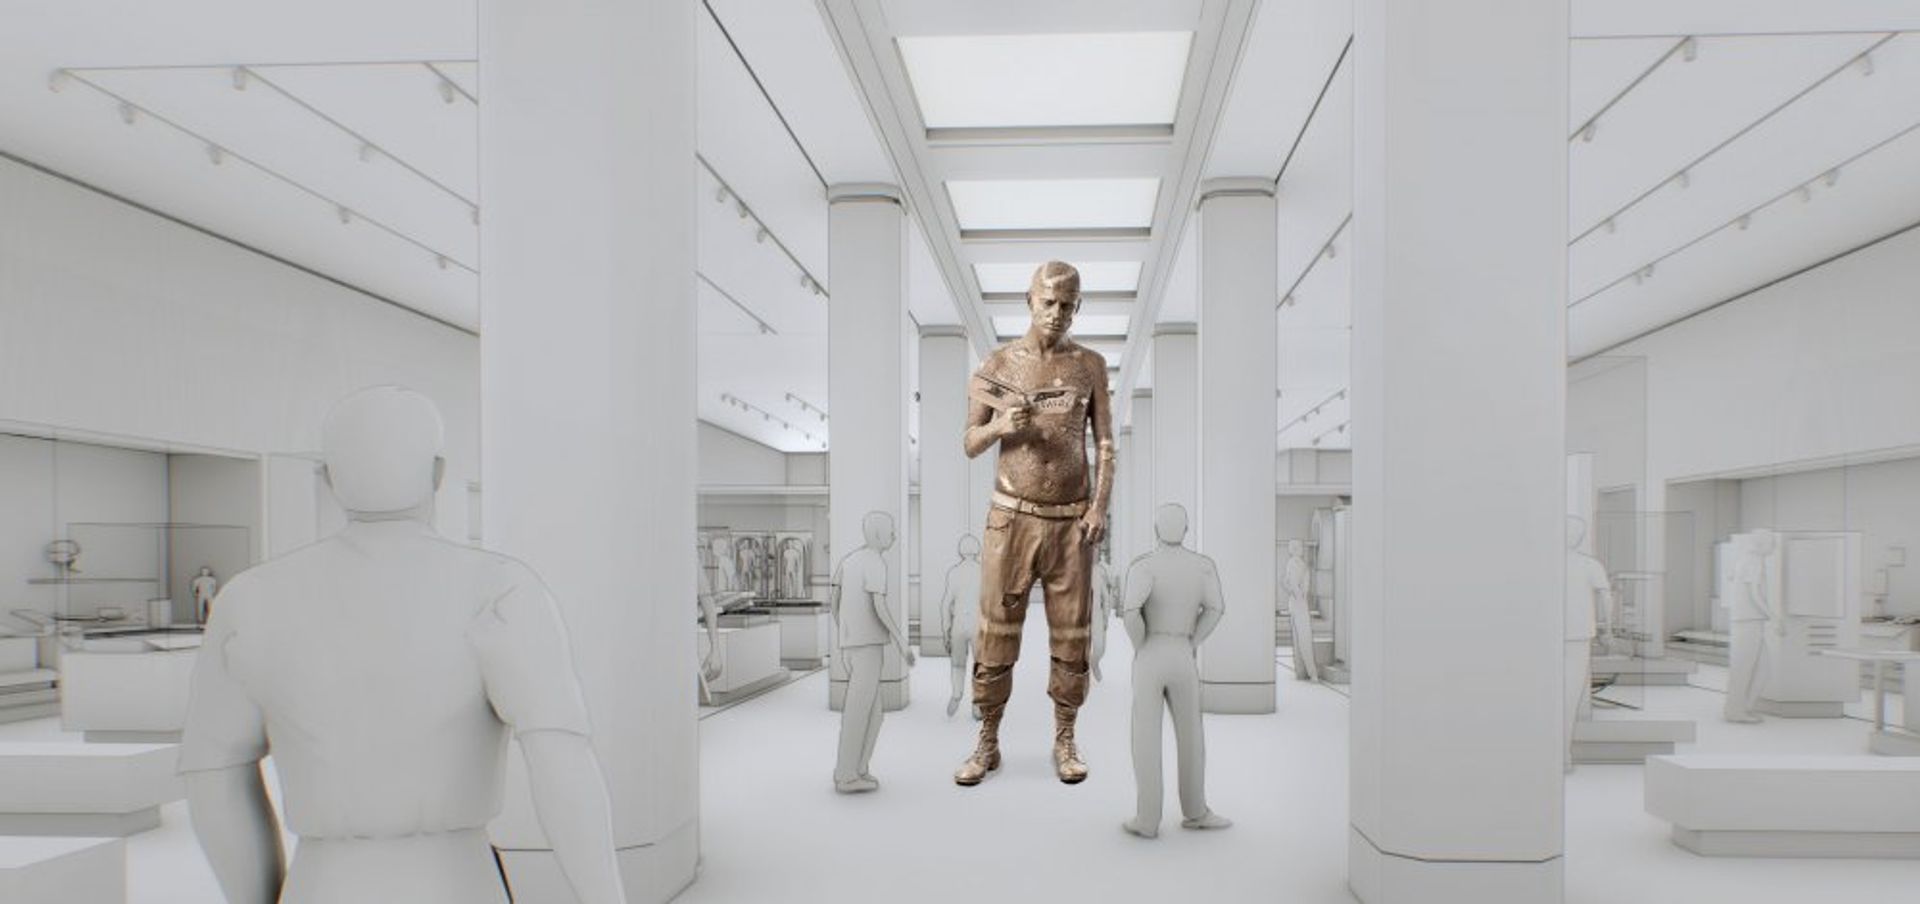 A rendering of Marc Quinn's Self-Conscious Gene sculpture at the Science Museum © Science Museum and Wilkinson Eyre